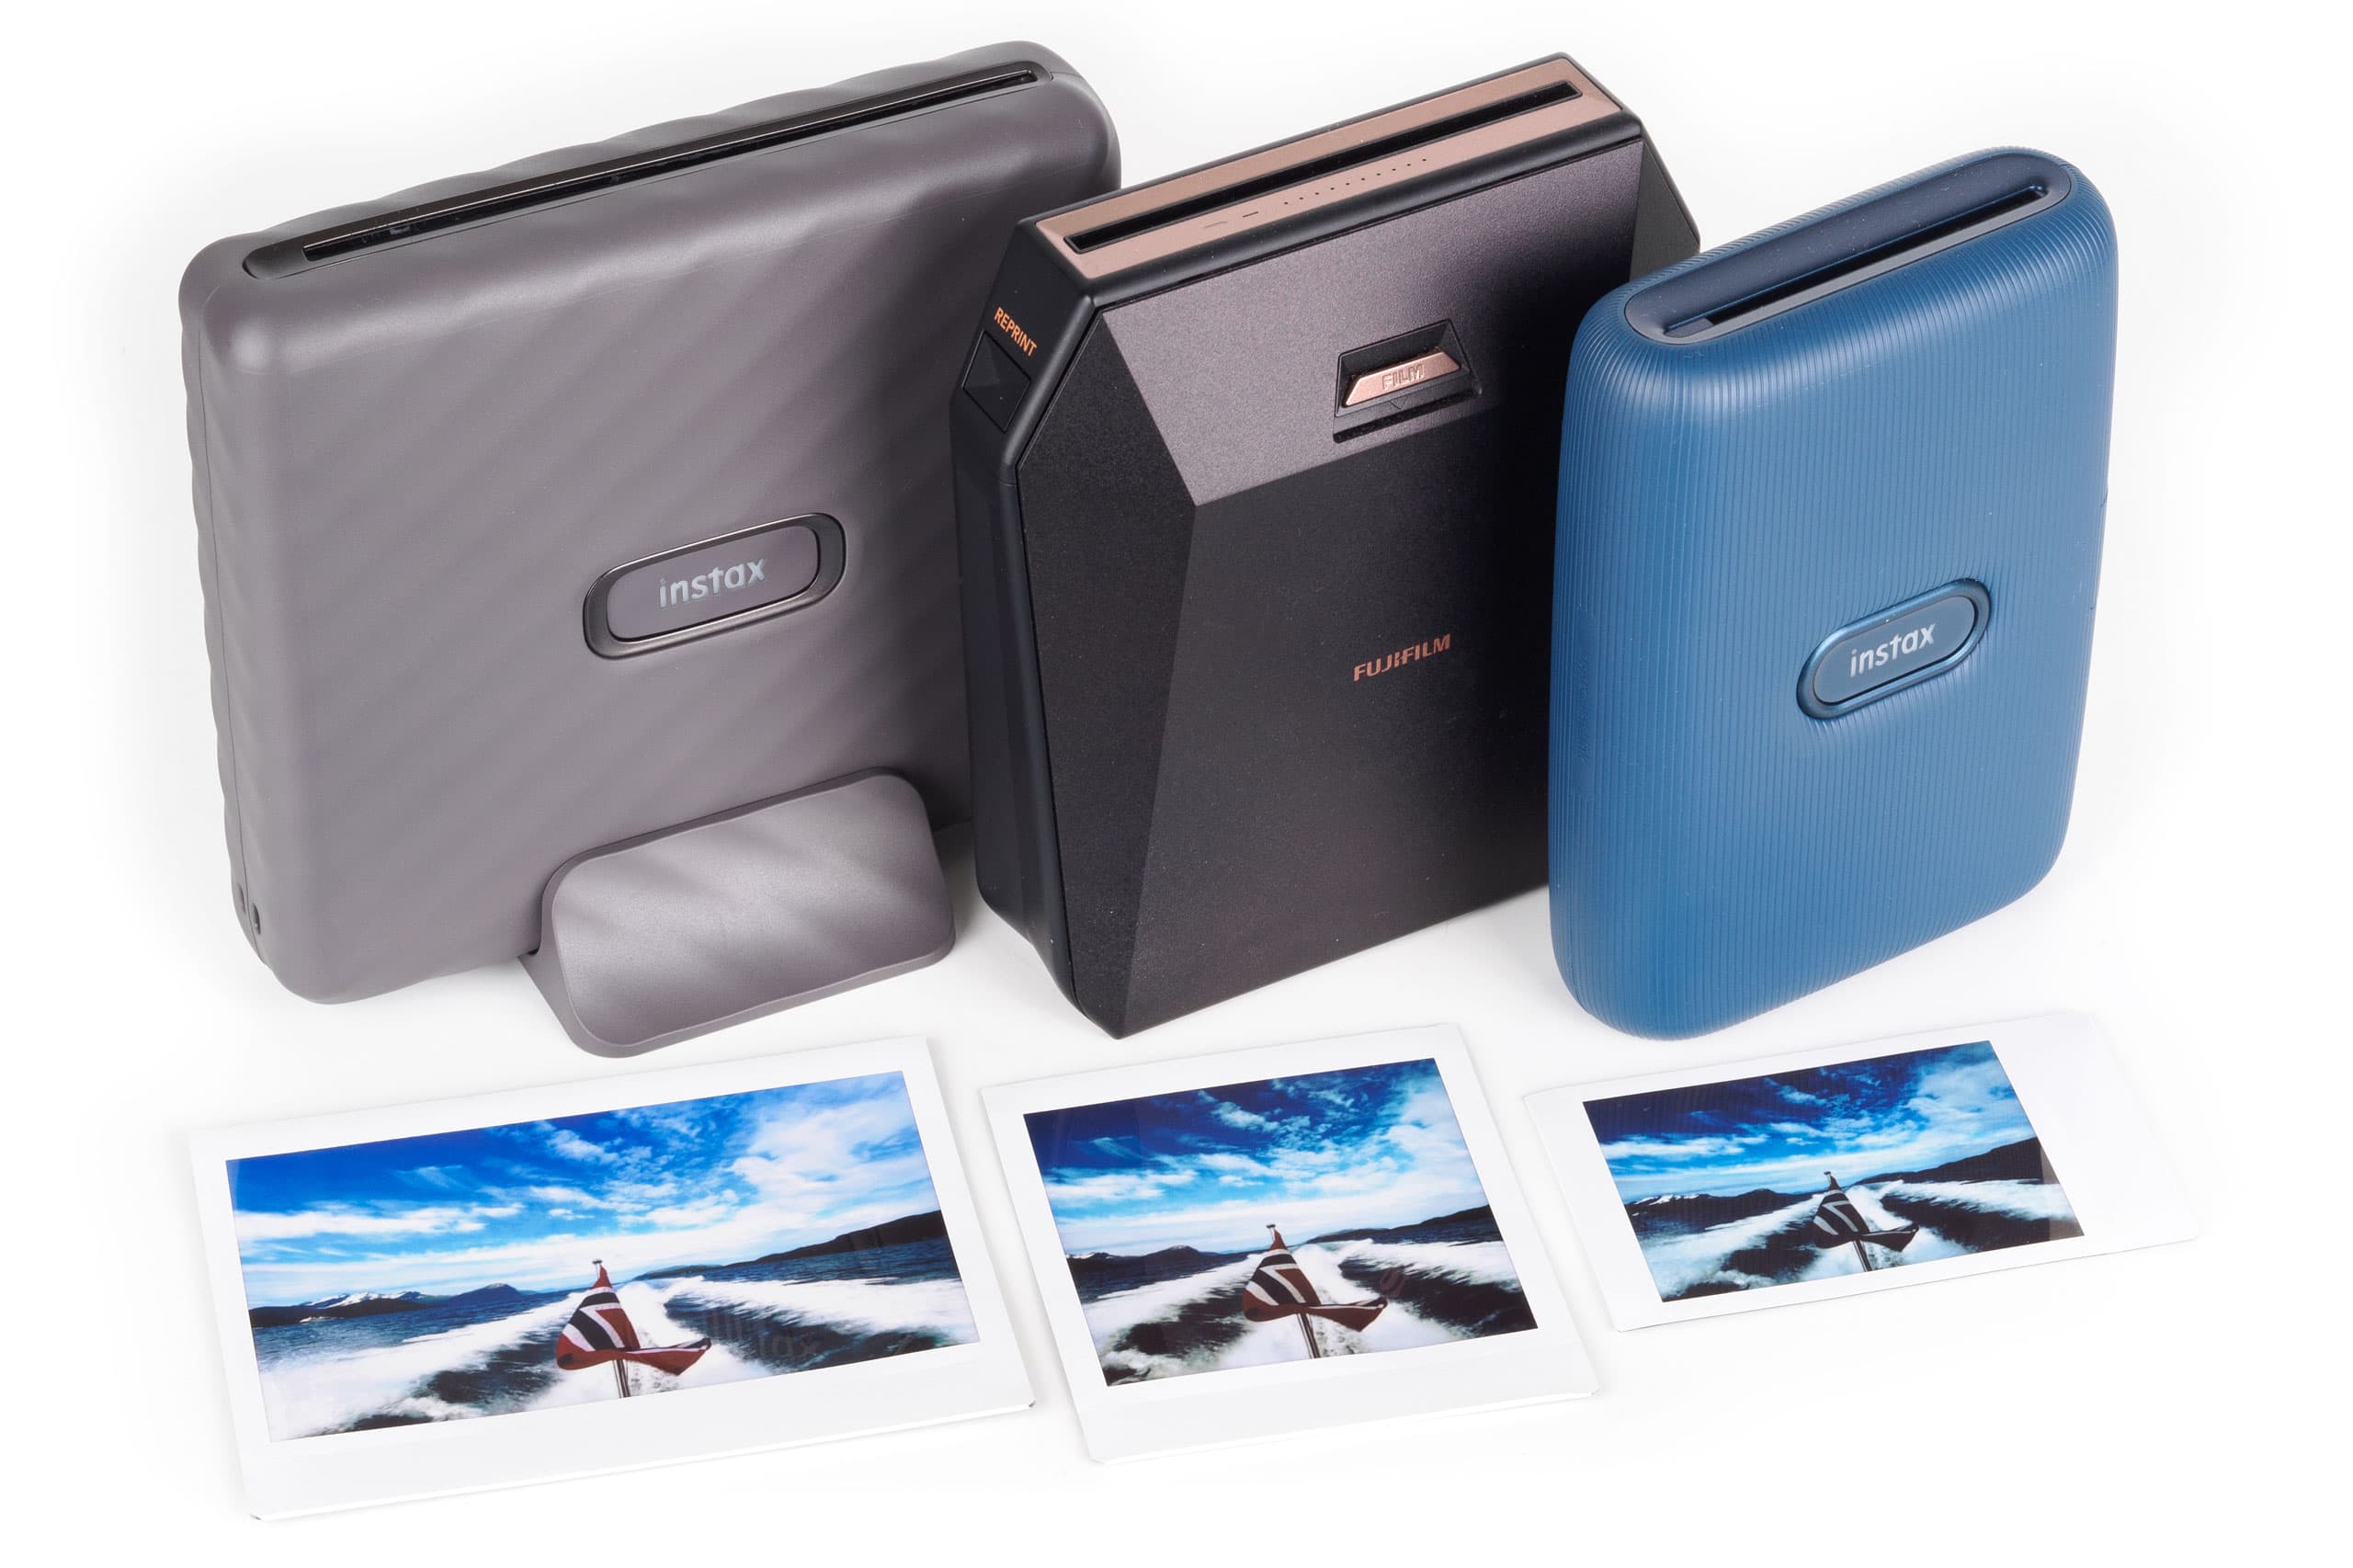 Fujifilm Instax Link WIDE, Tutorial and Review